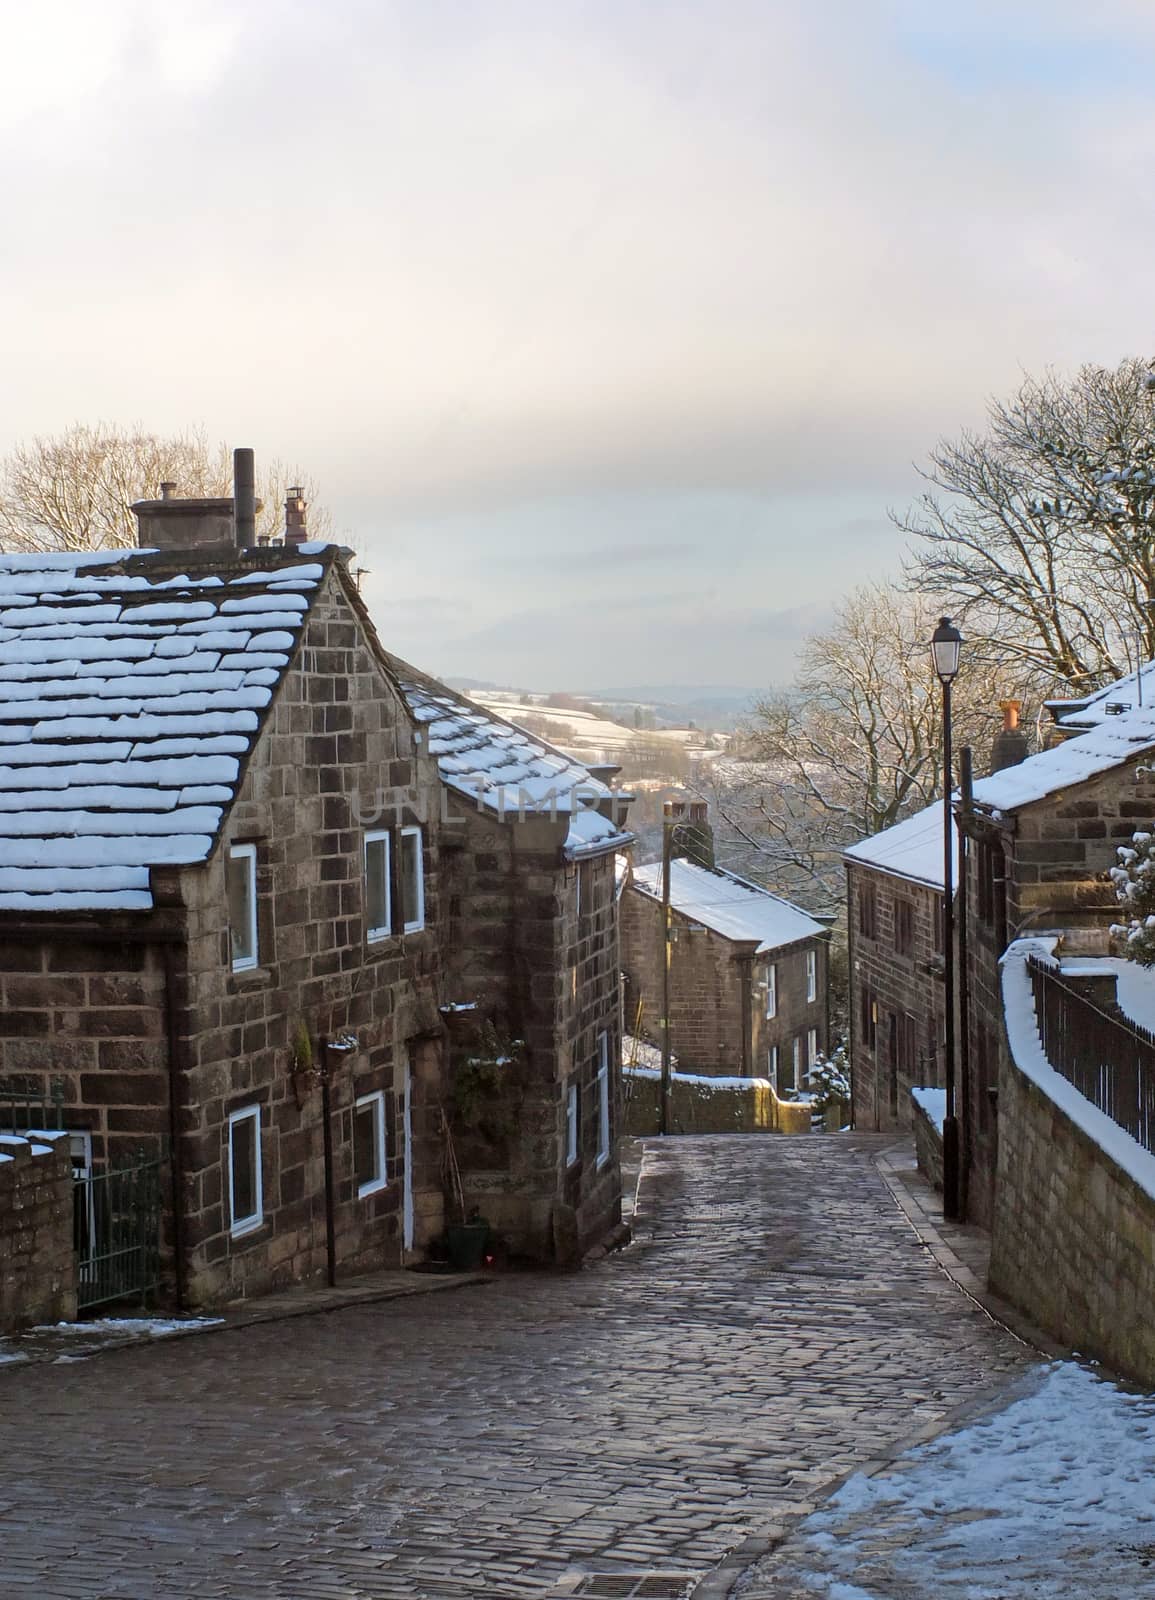 A scenic view of the main street in the village of heptonstall in west yorkshire with snow covering the old stone houses and pennine scenery visible in the background by philopenshaw